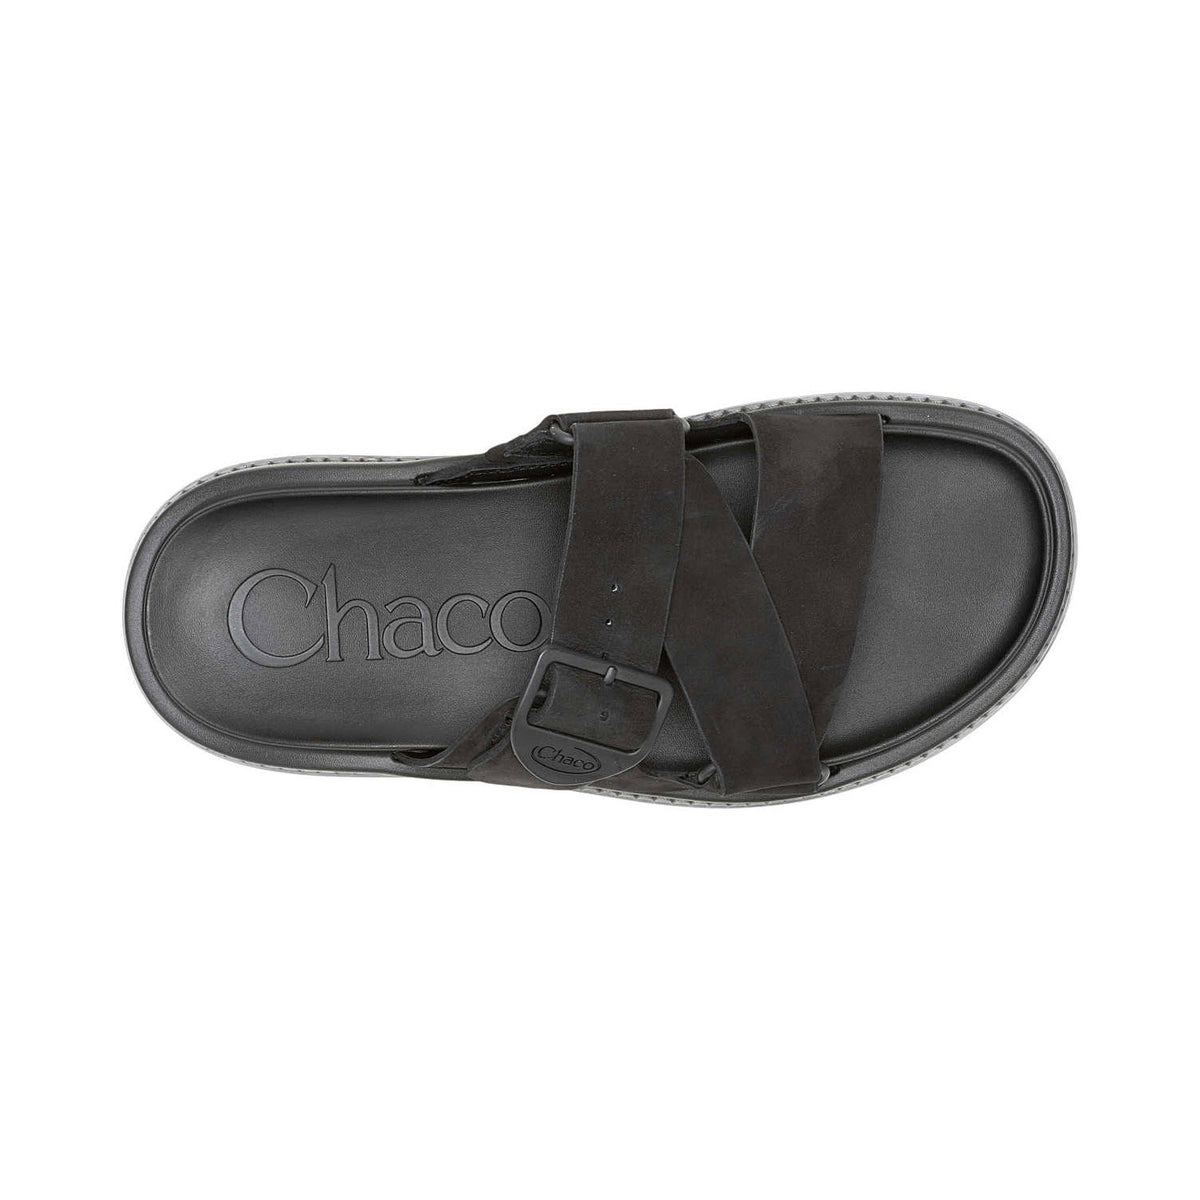 Top view of a single Chaco Townes Slide Black sandal featuring a LUVSEAT footbed with dark straps on a white background.